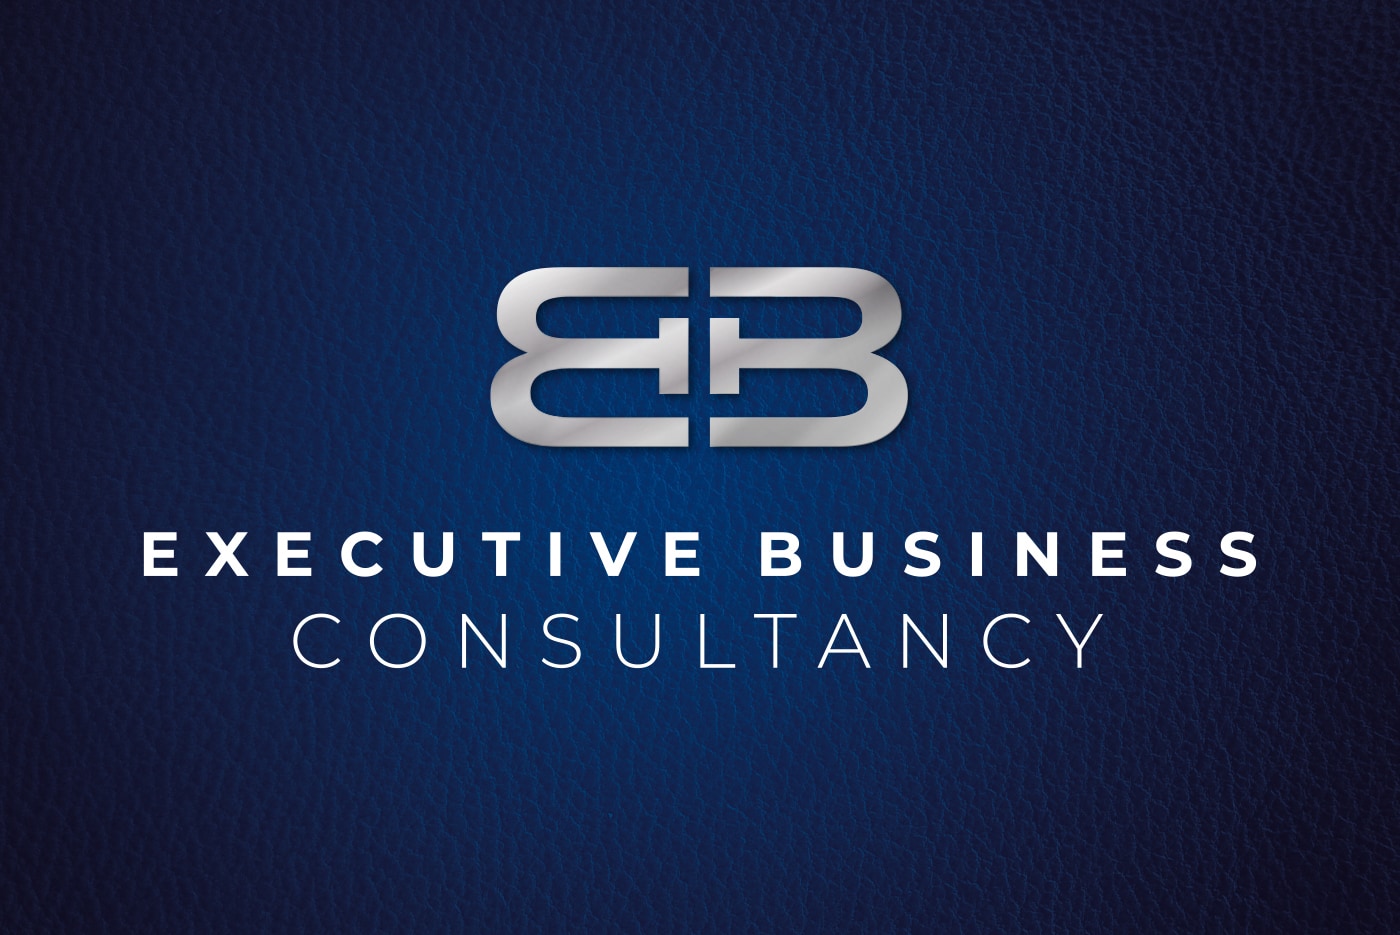 Executive Business Consultancy